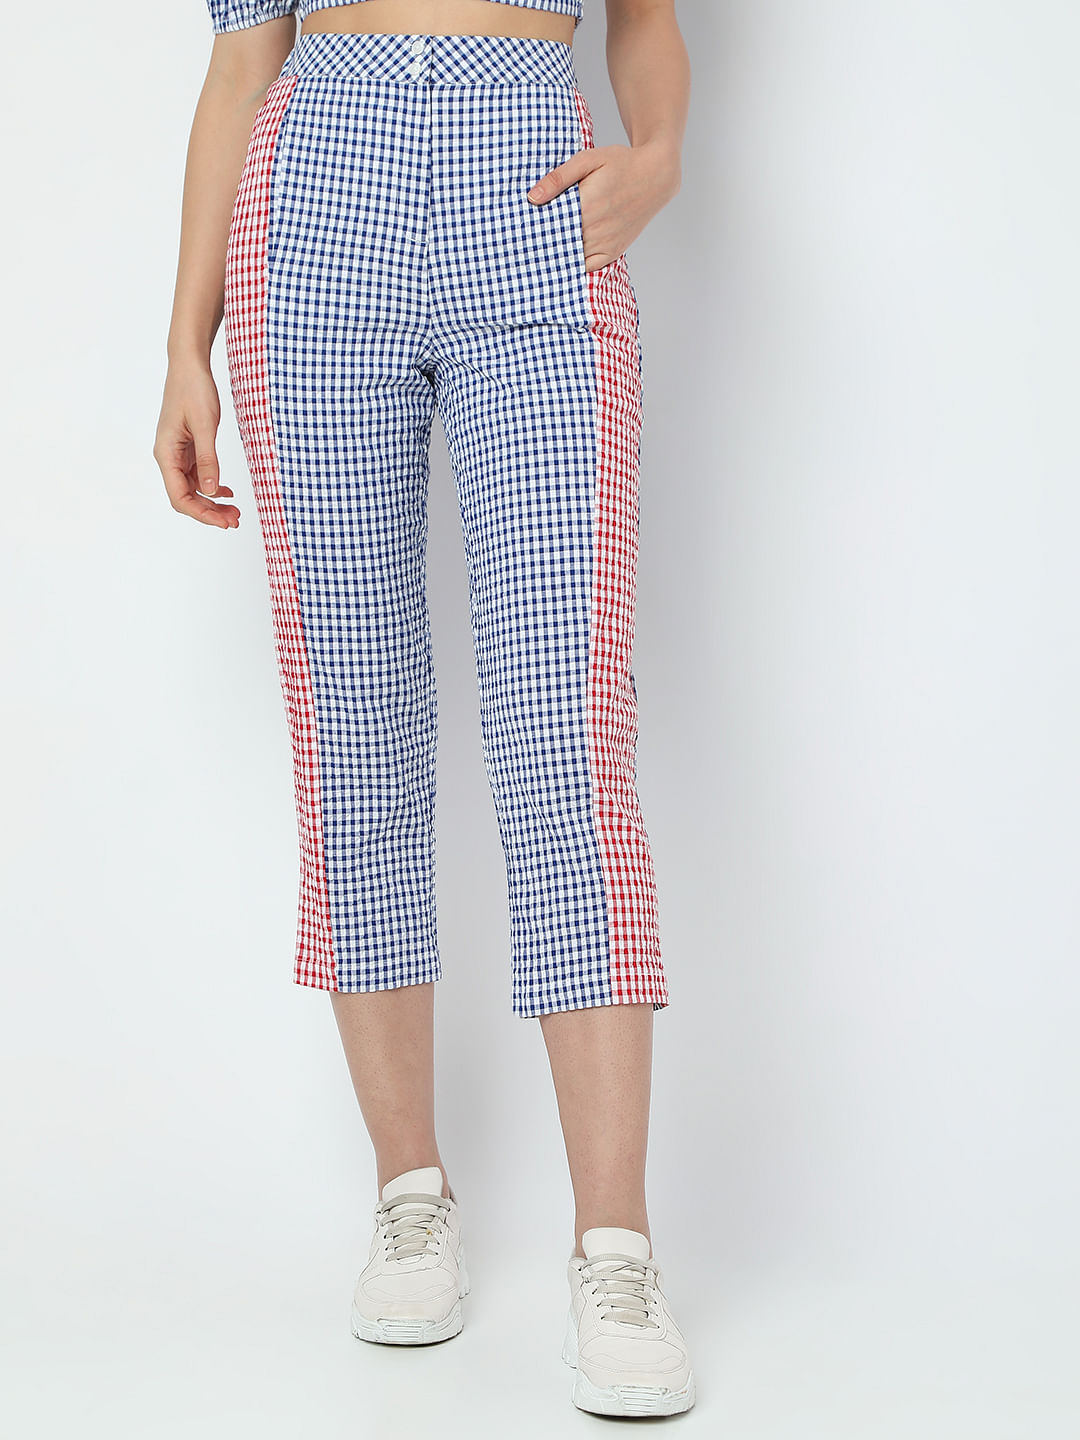 Buy SASSAFRAS Women Off White & Black Tapered Fit Checked Cropped Trousers  - Trousers for Women 10604538 | Myntra